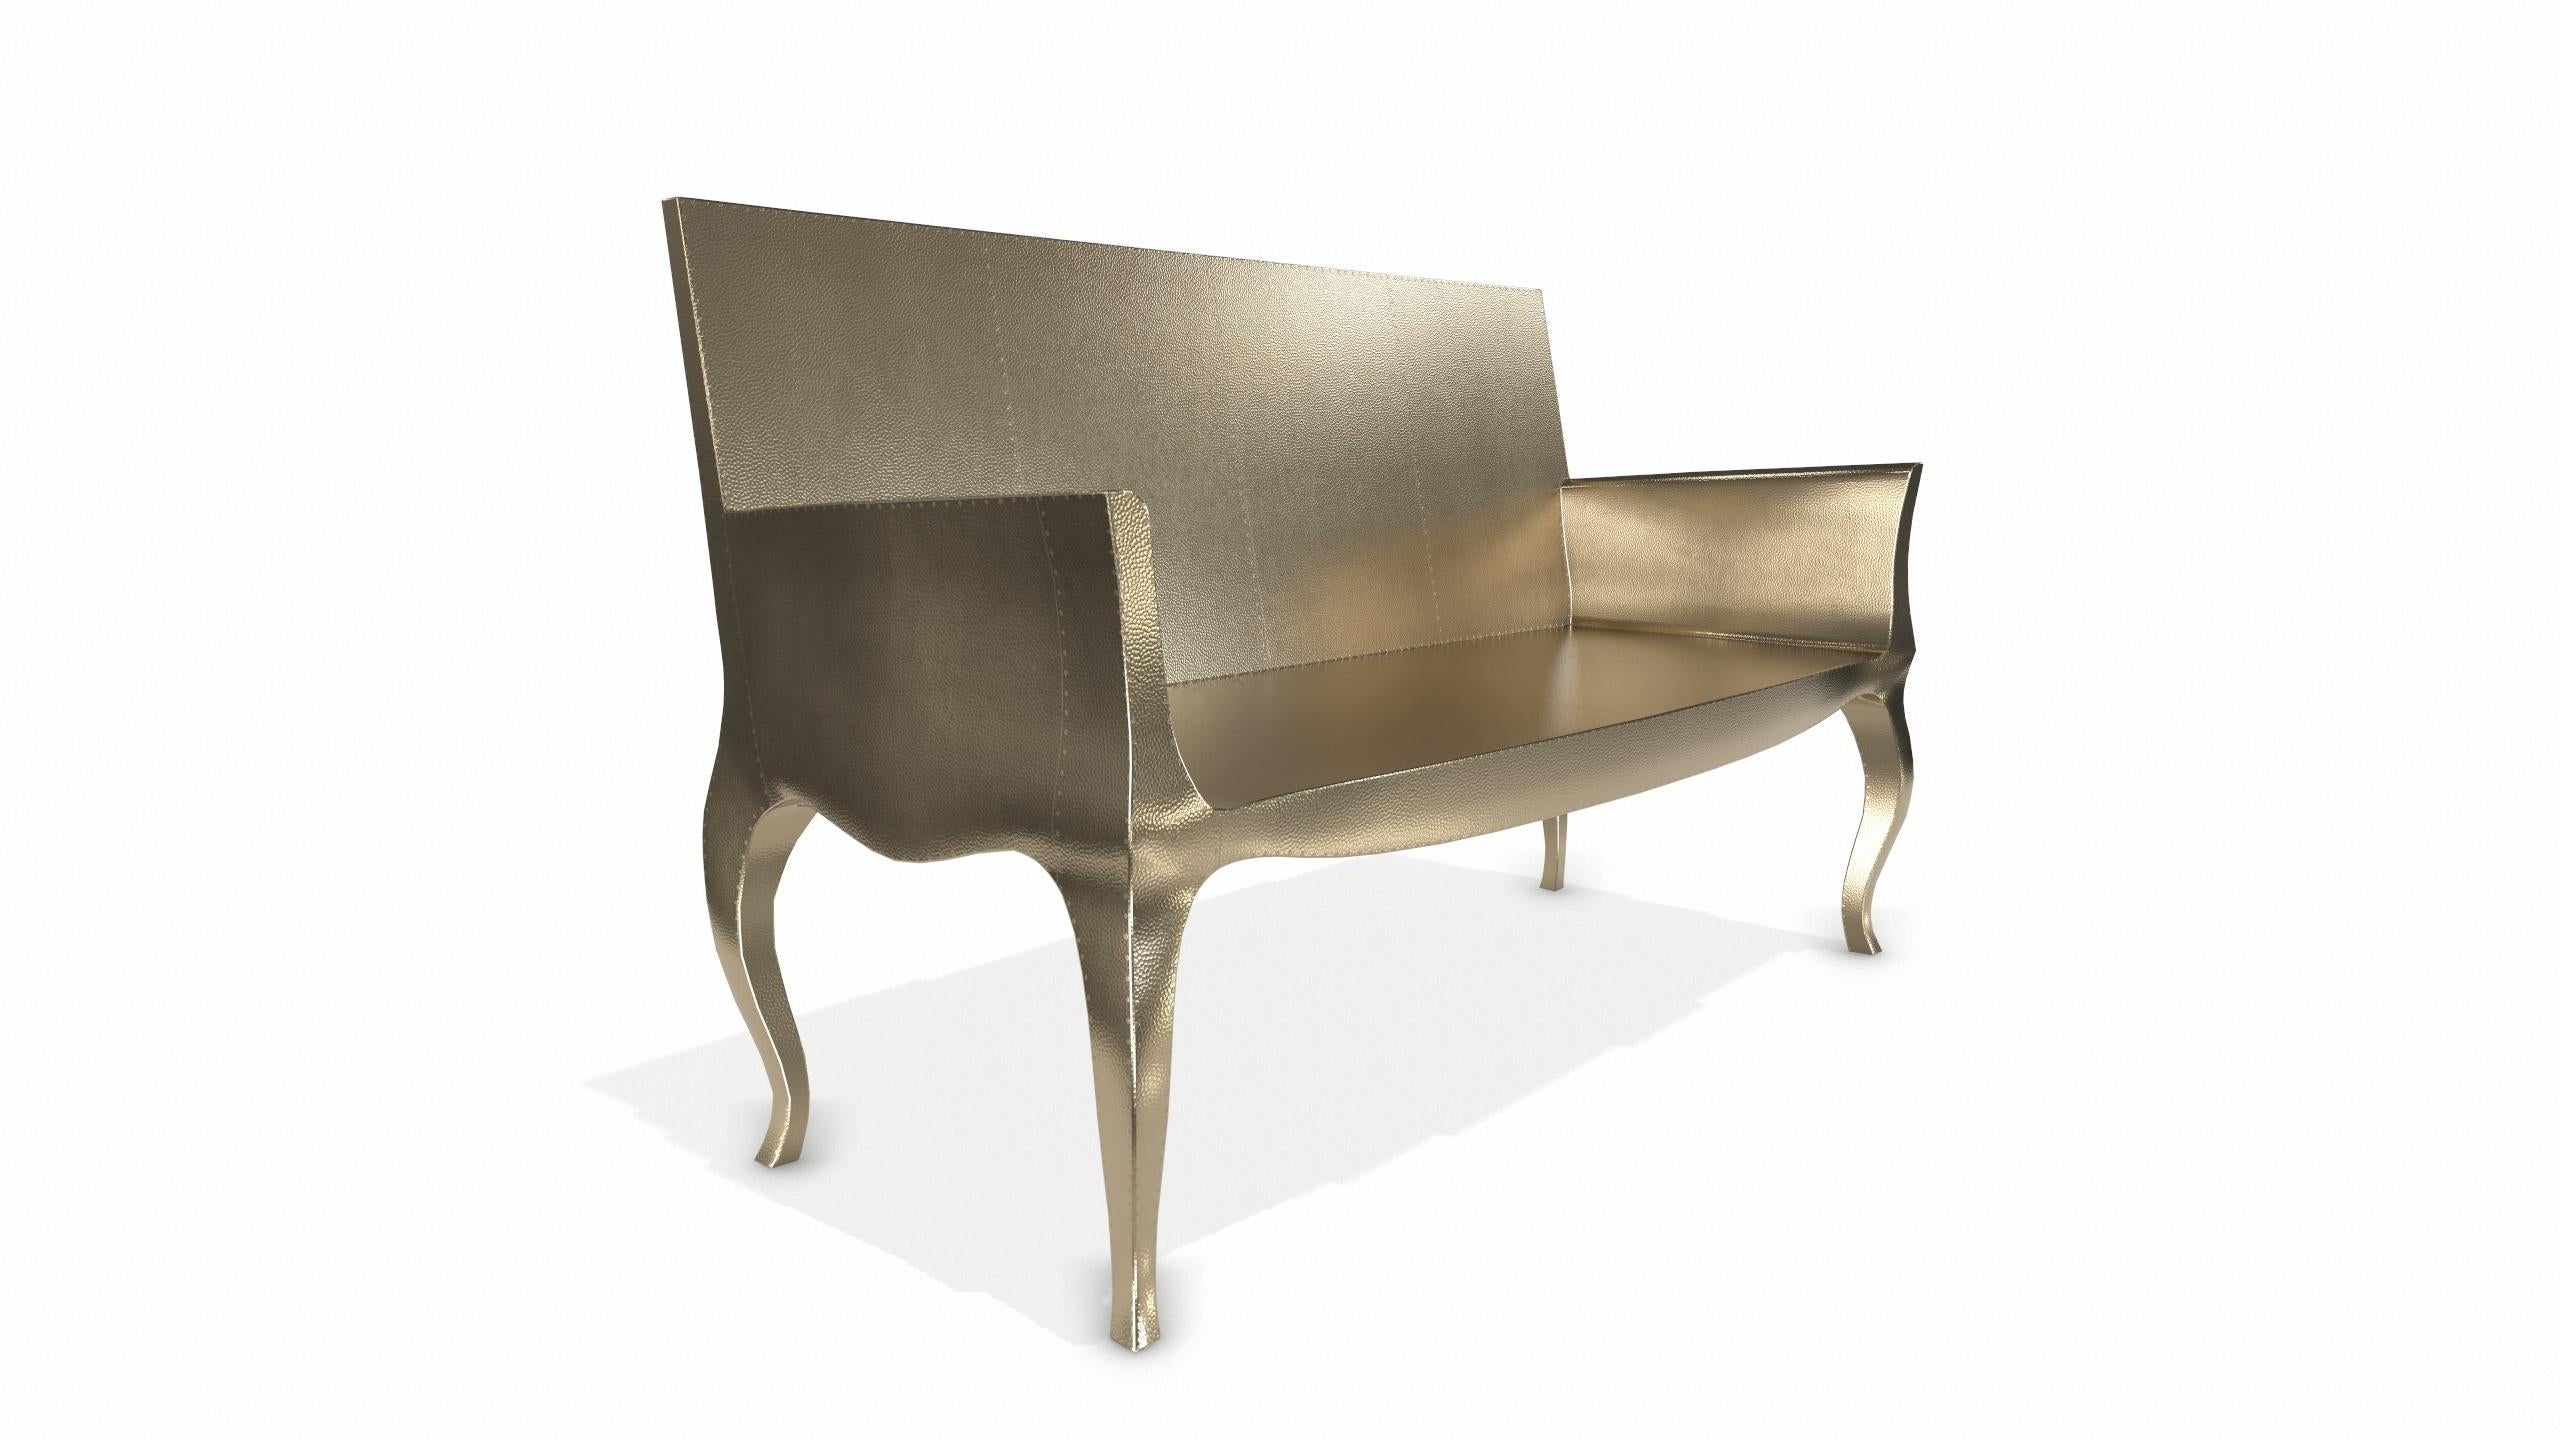 Louise Settee Art Deco Lounge Chairs in Mid. Hammered Brass by Paul Mathieu In New Condition For Sale In New York, NY